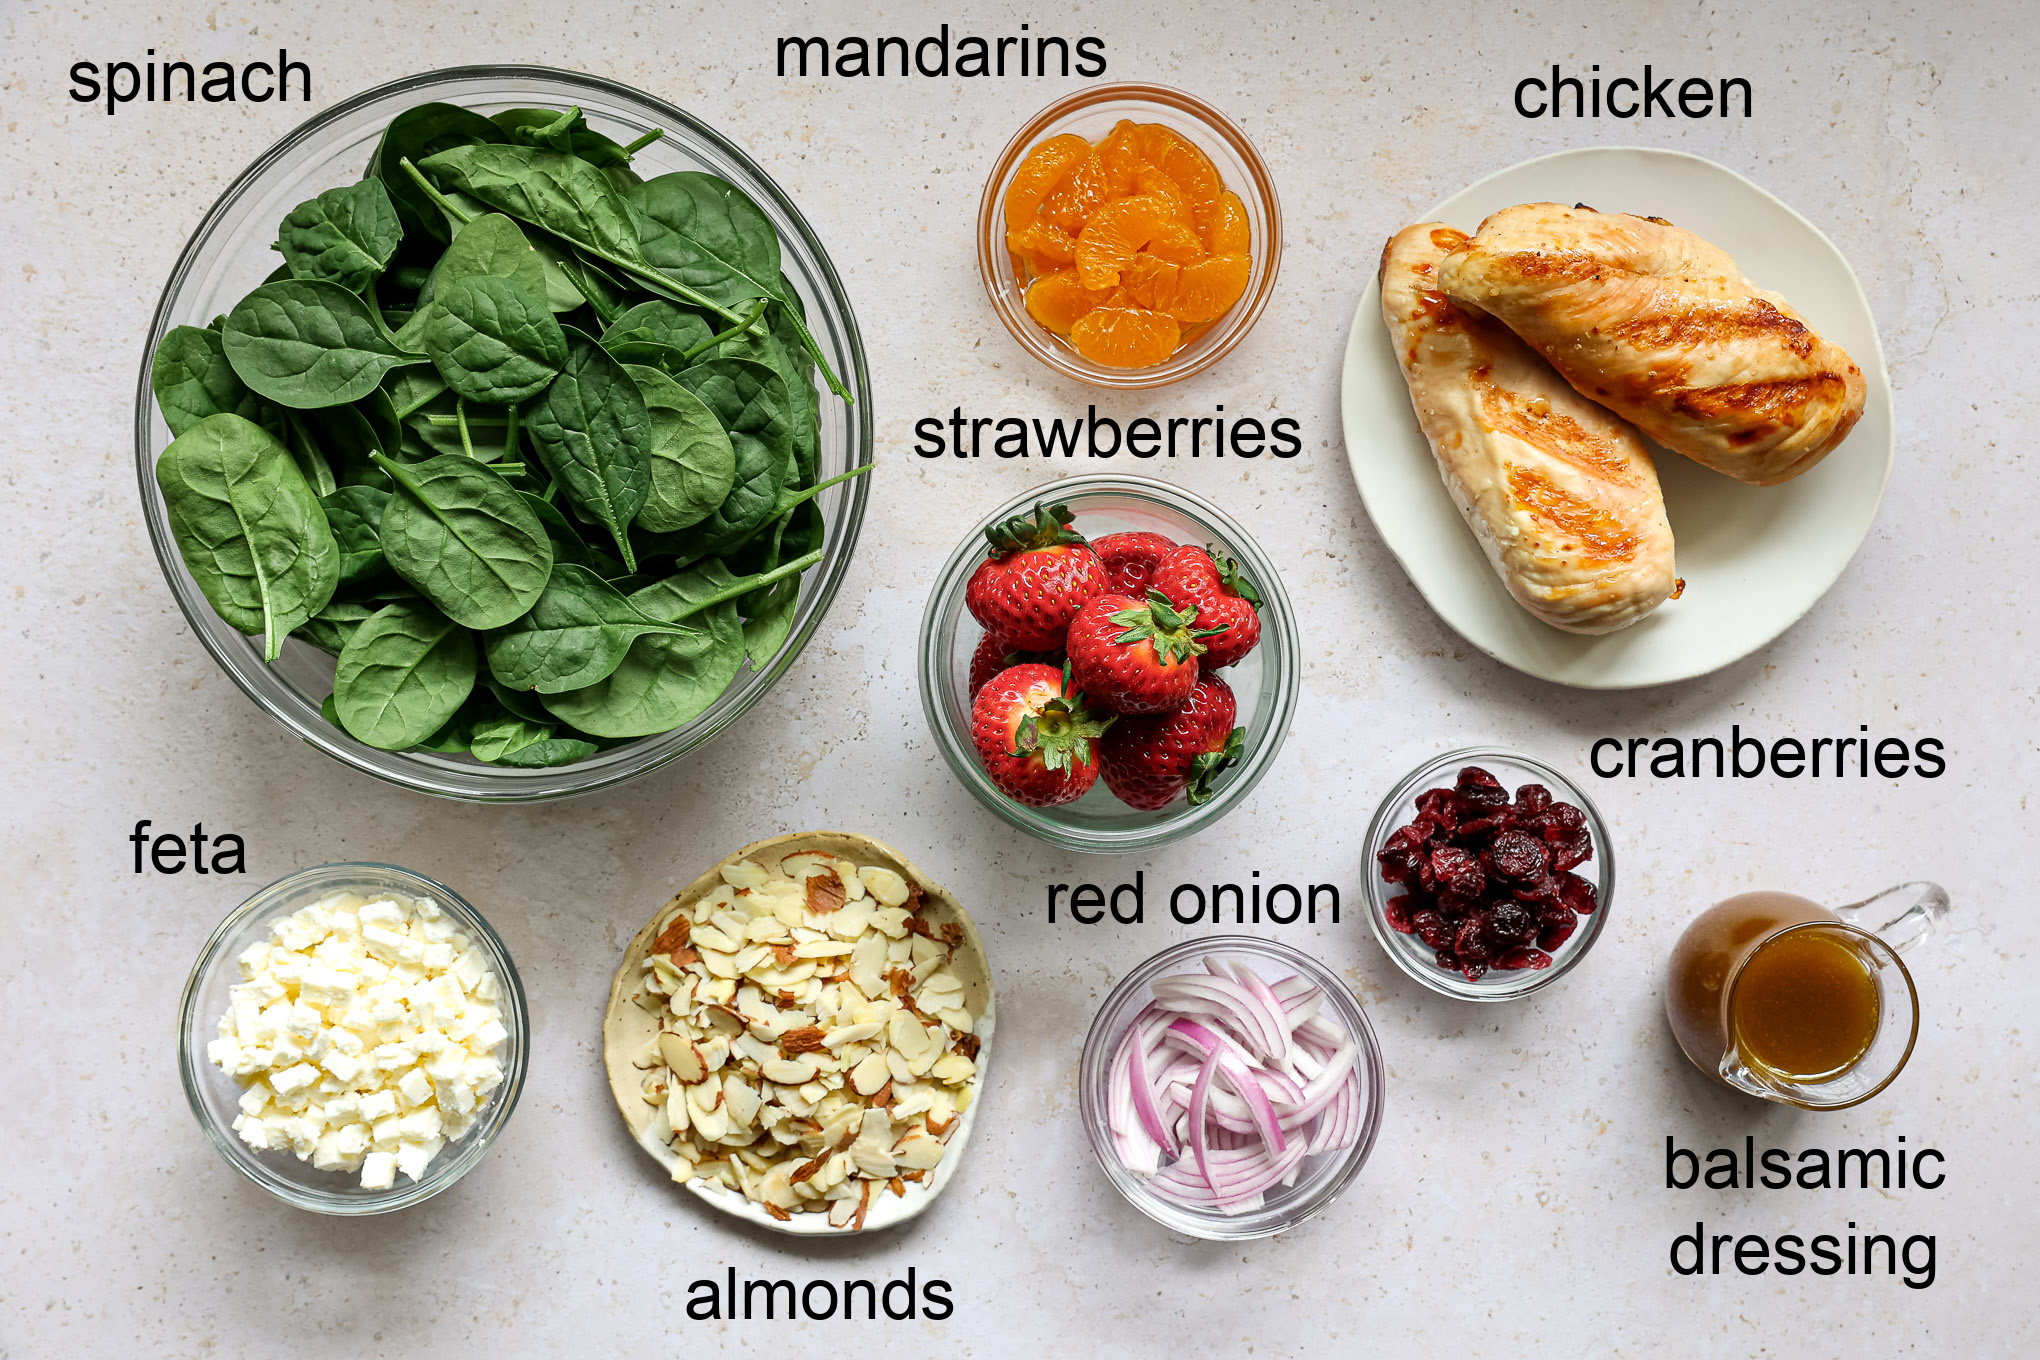 ingredients for strawberry spinach salad with chicken.